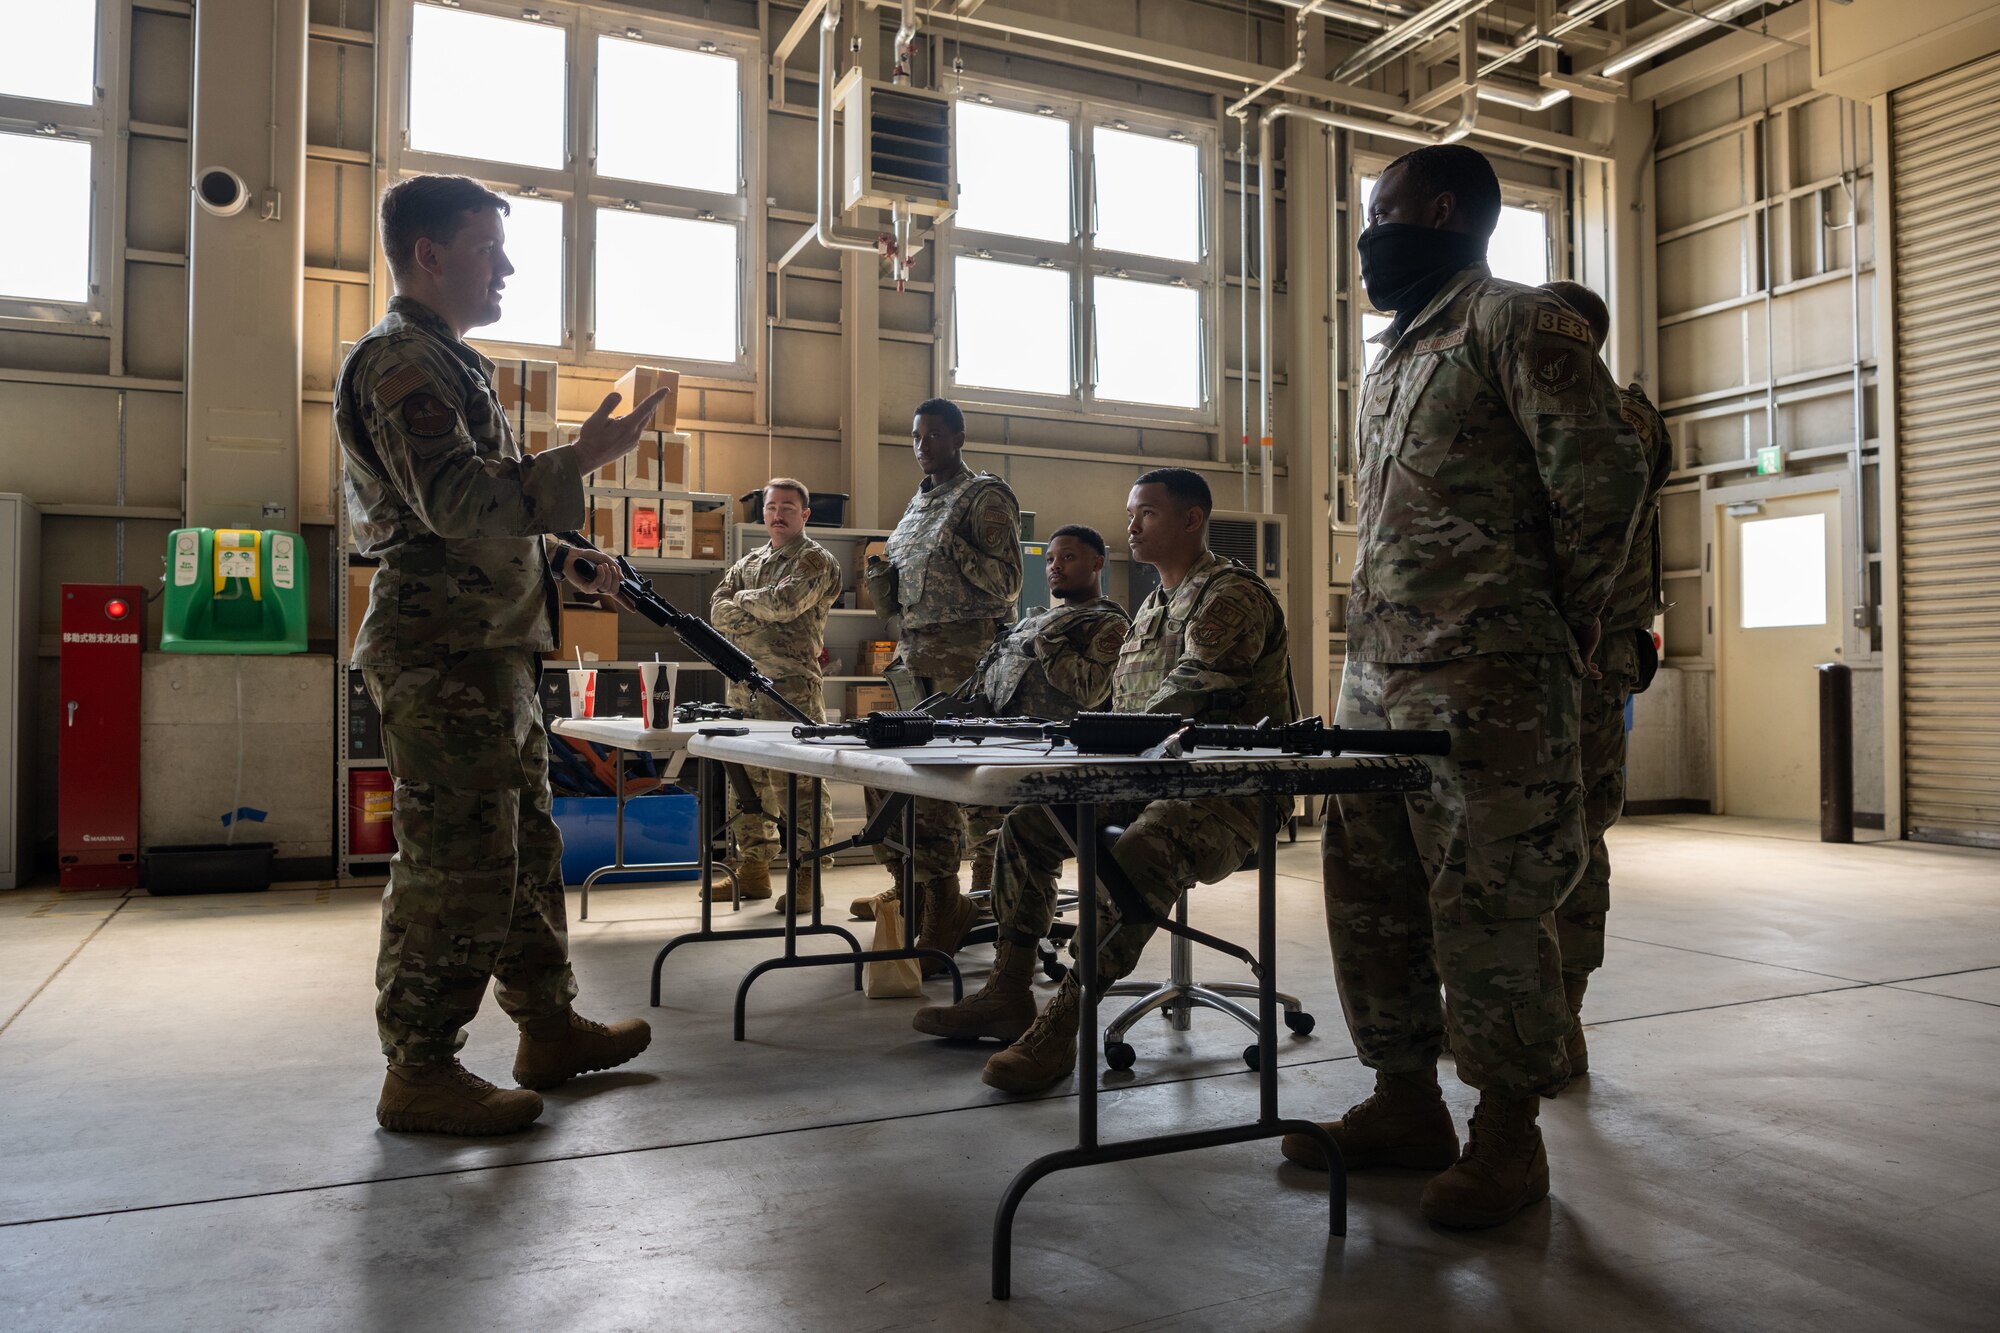 U.S. Air Force Staff Sgt. Woodrow Young, 35th Civil Engineer Squadron structural craftsman, explains safety features while teaching weapons familiarization during the annual Prime Base Engineer Emergency Force (Prime BEEF) training at Misawa Air Base, Japan, June 14, 2022.